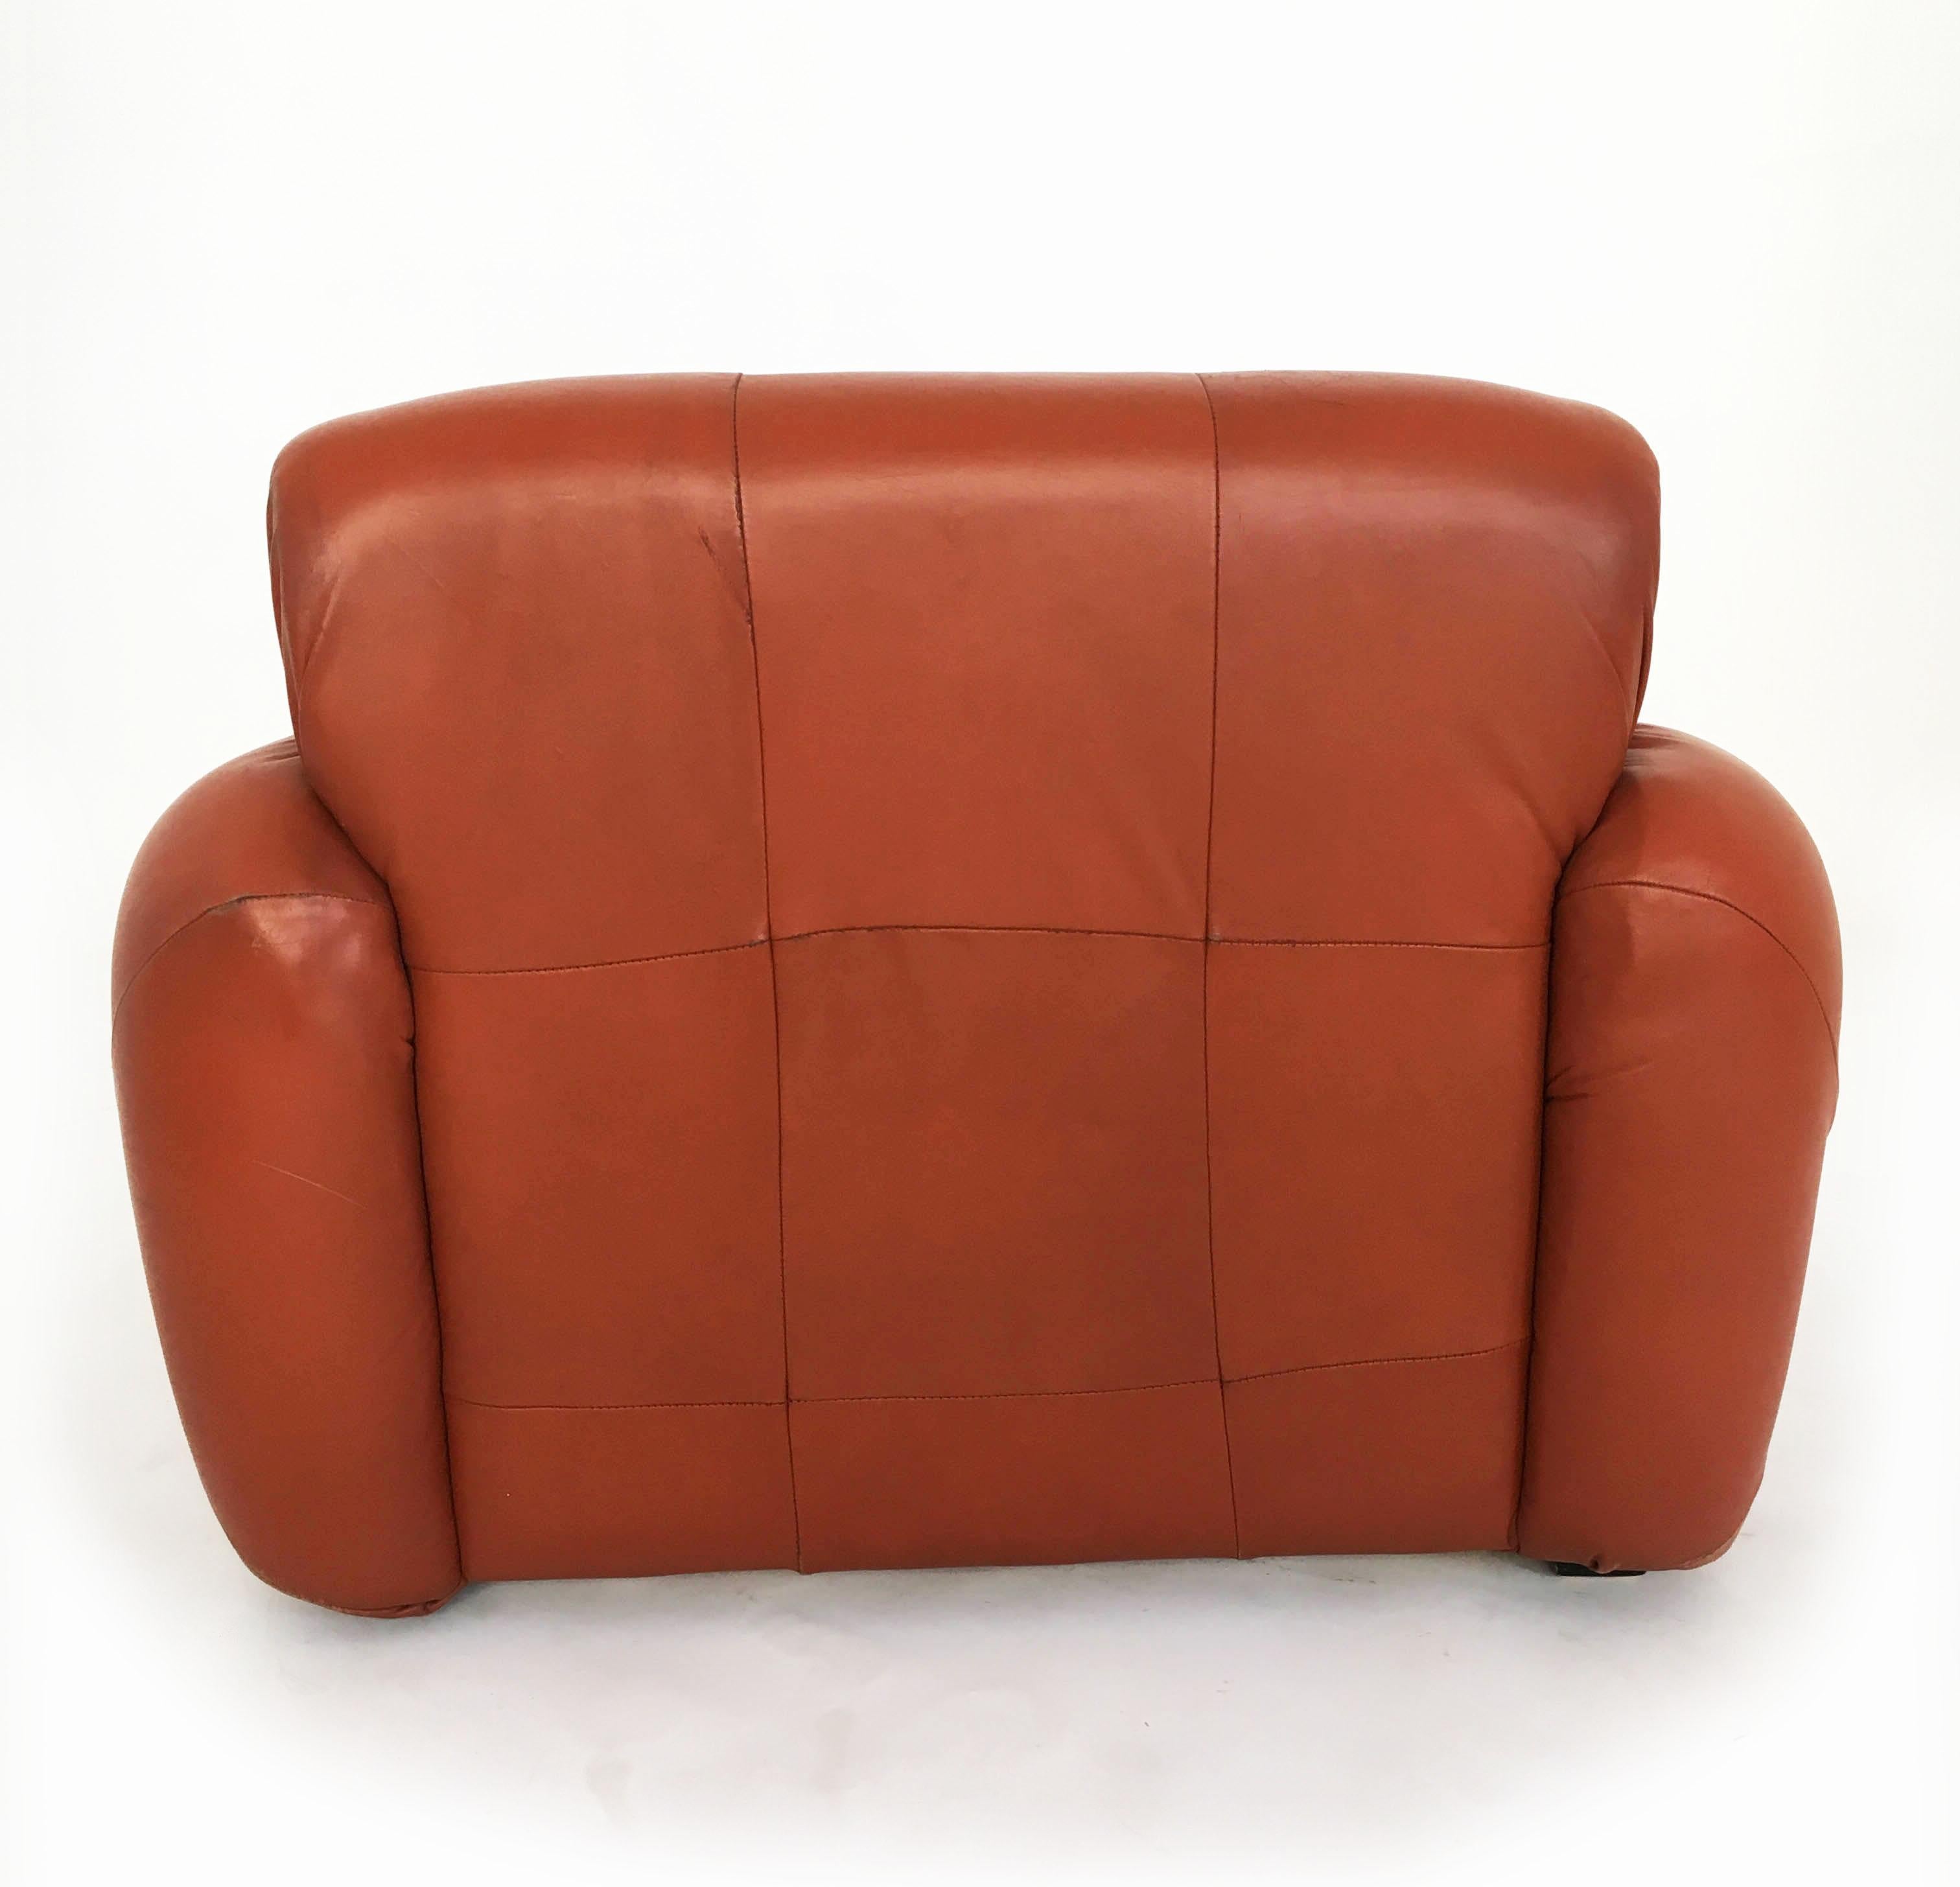 Jean Gillon Cognac Patchwork Leather Club Chairs by Probel, Brazil 1970s For Sale 8